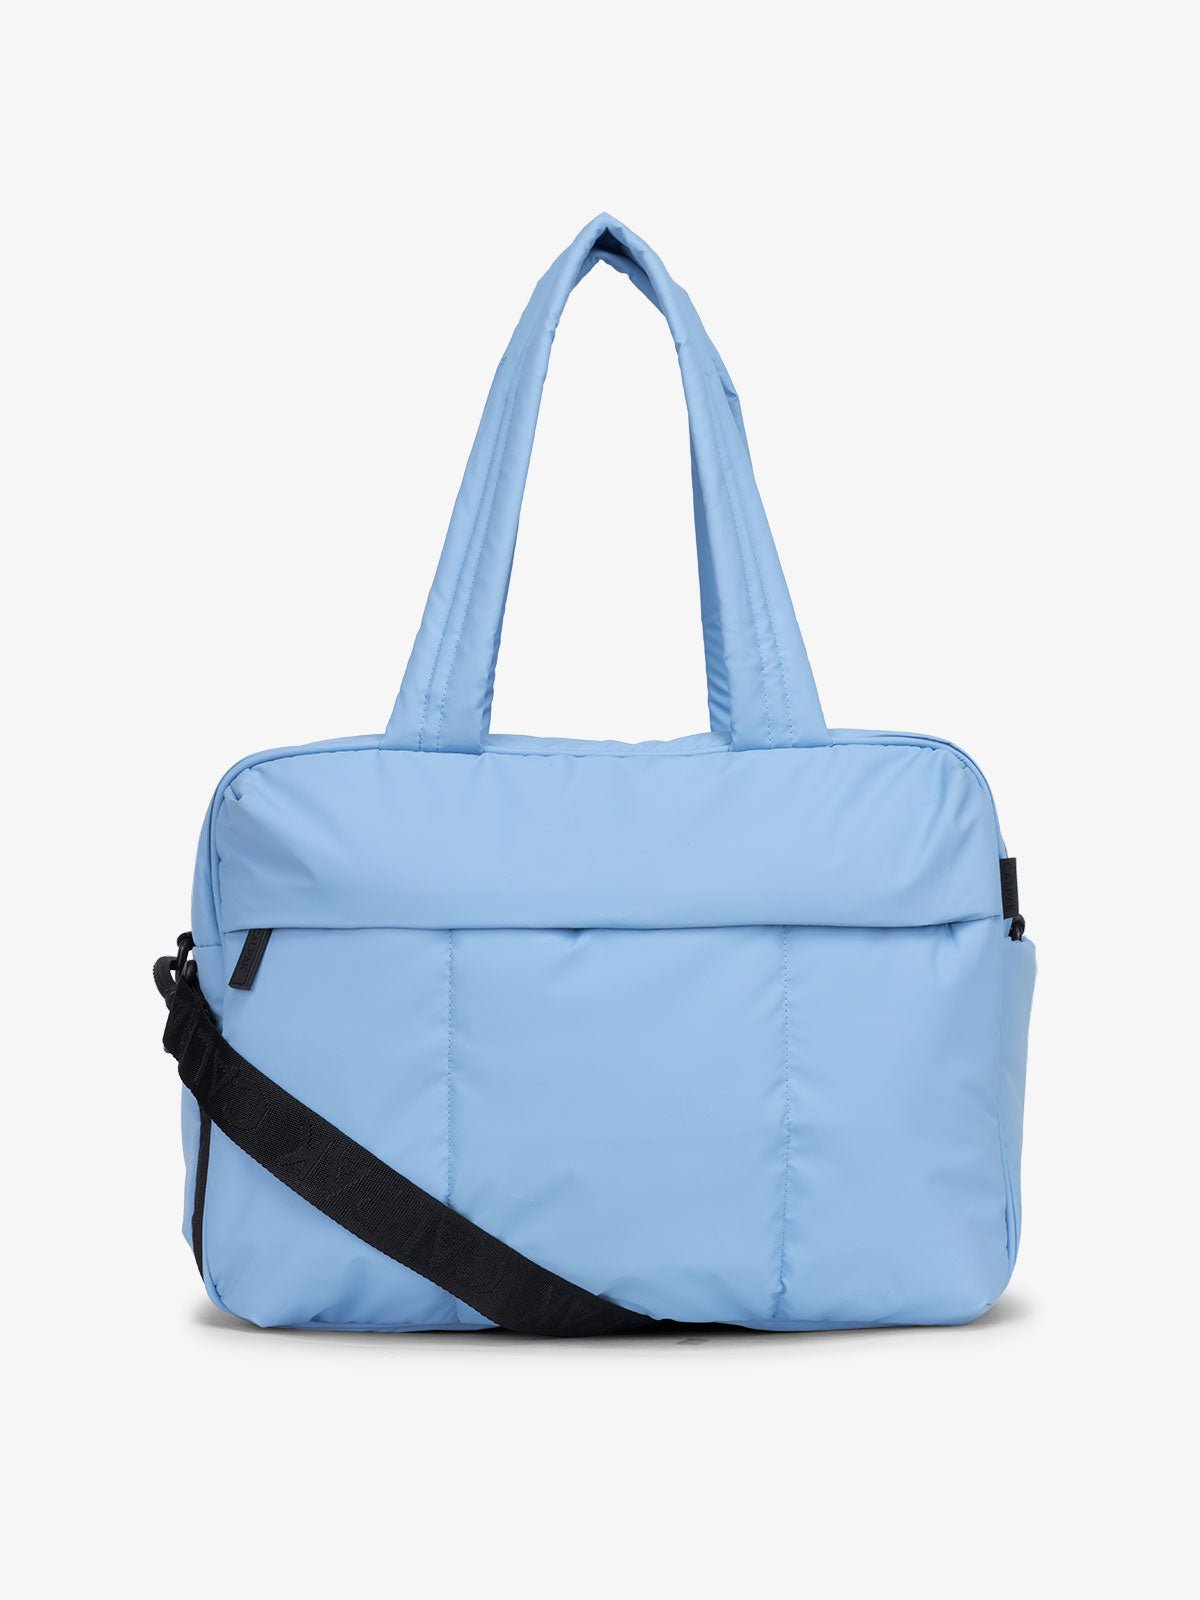 CALPAK Luka Duffel puffy Bag with detachable strap and zippered front pocket in light blue